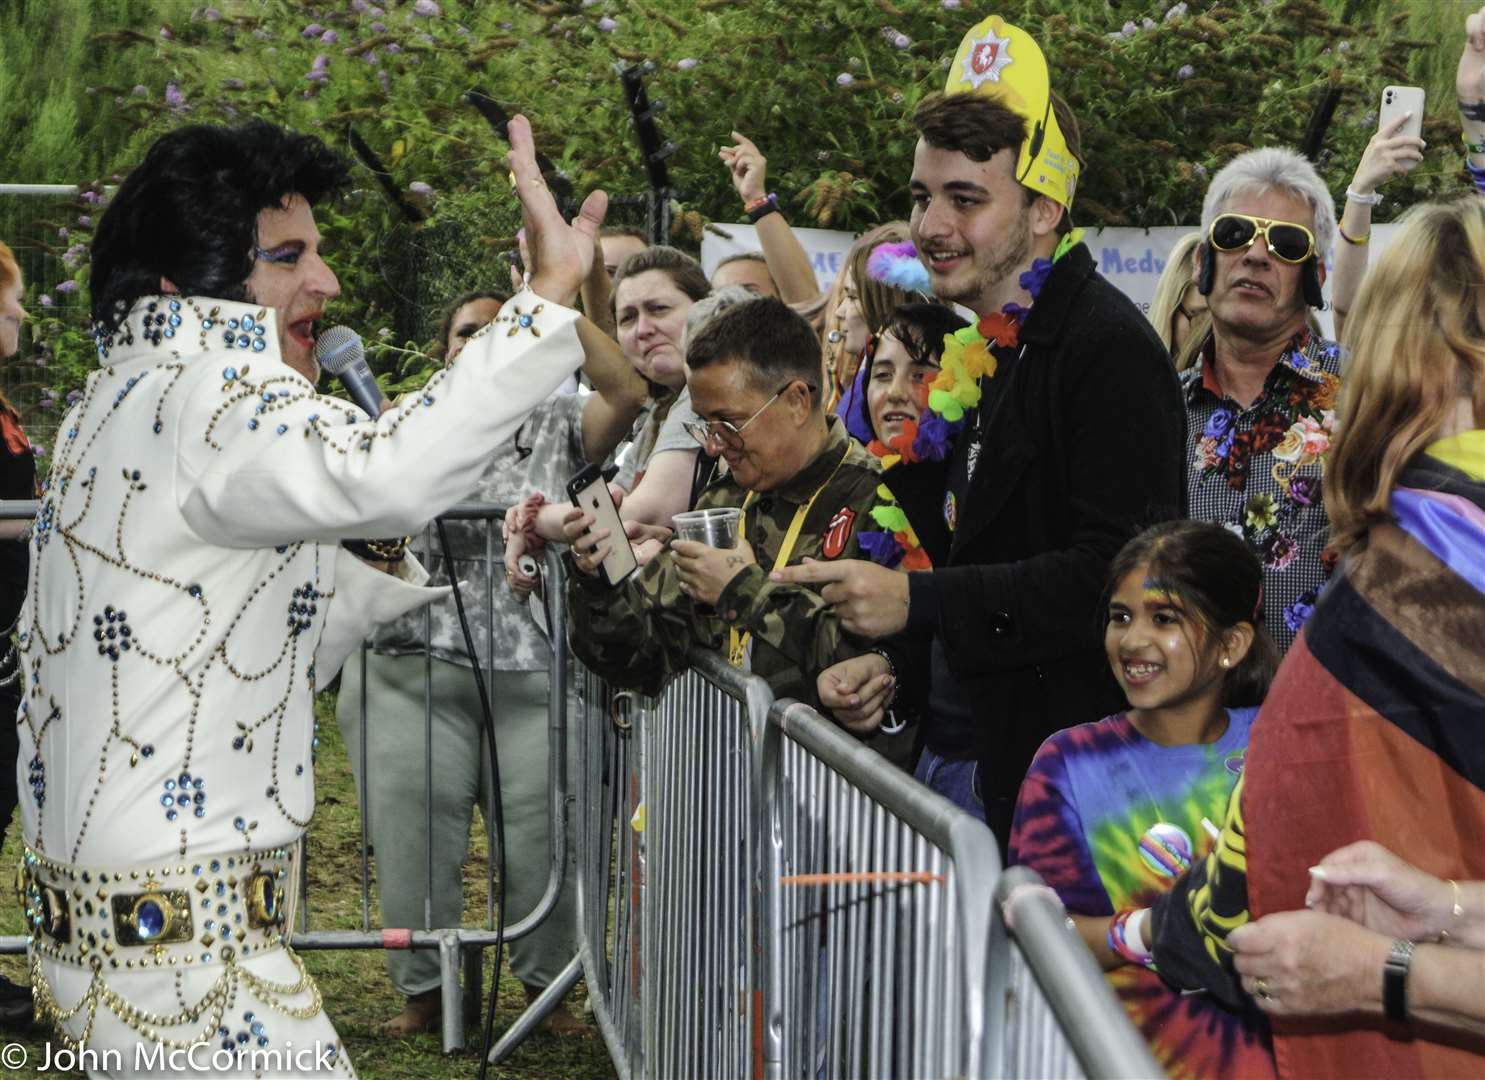 Elbrace, aka Gay Elvis, entertains the crowd at a previous year's Medway Pride.